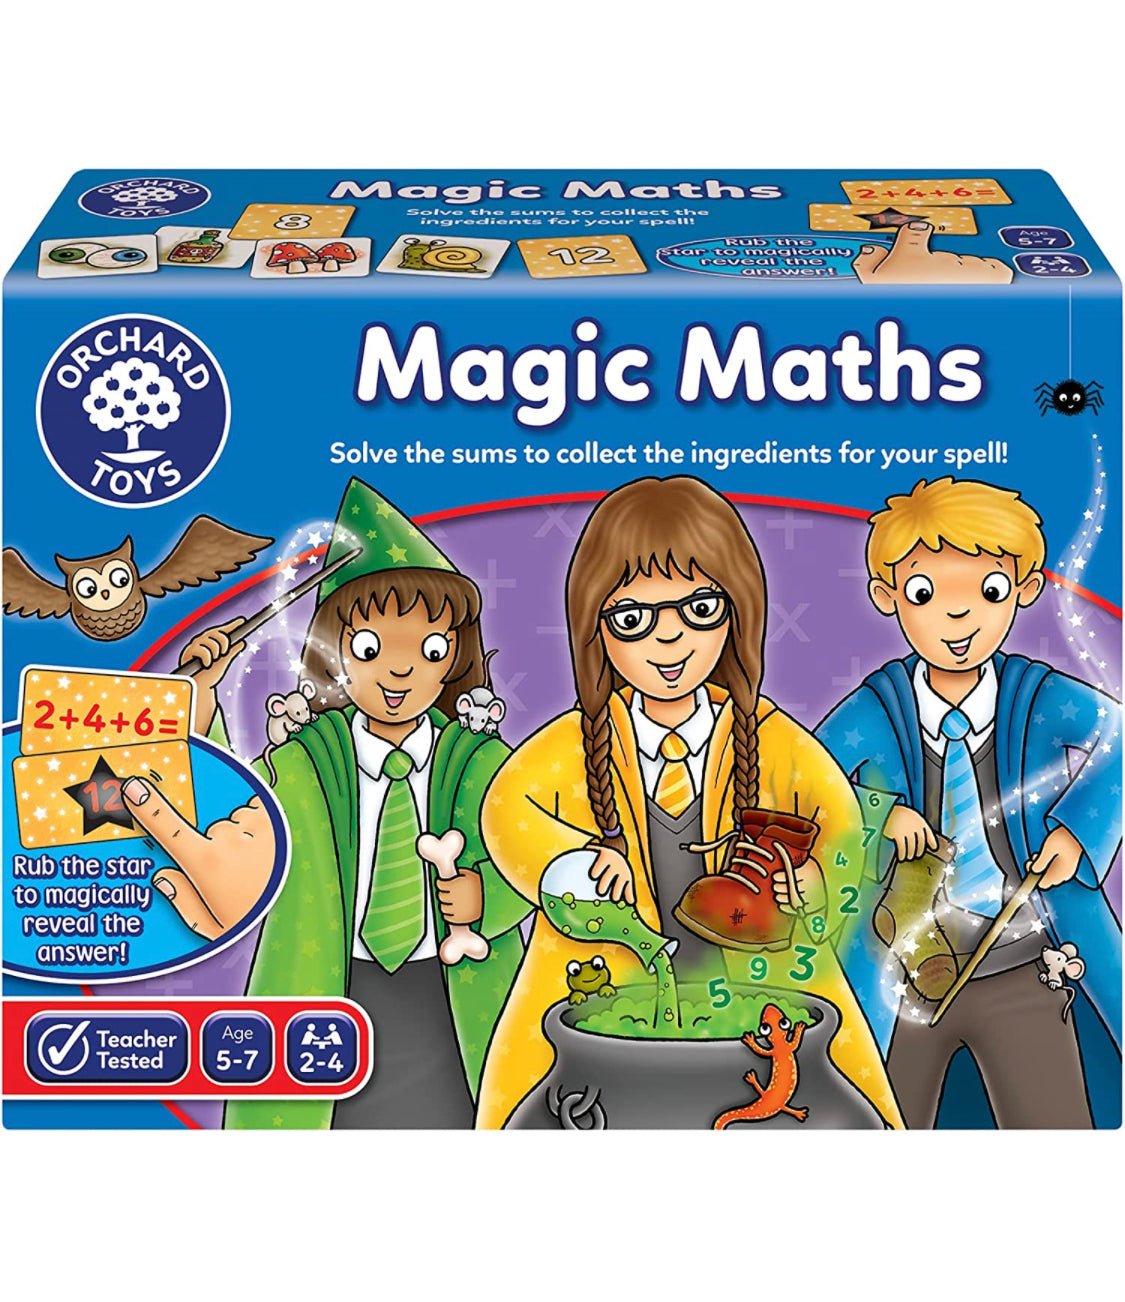 Magic Maths | Learning and Exploring Through Play